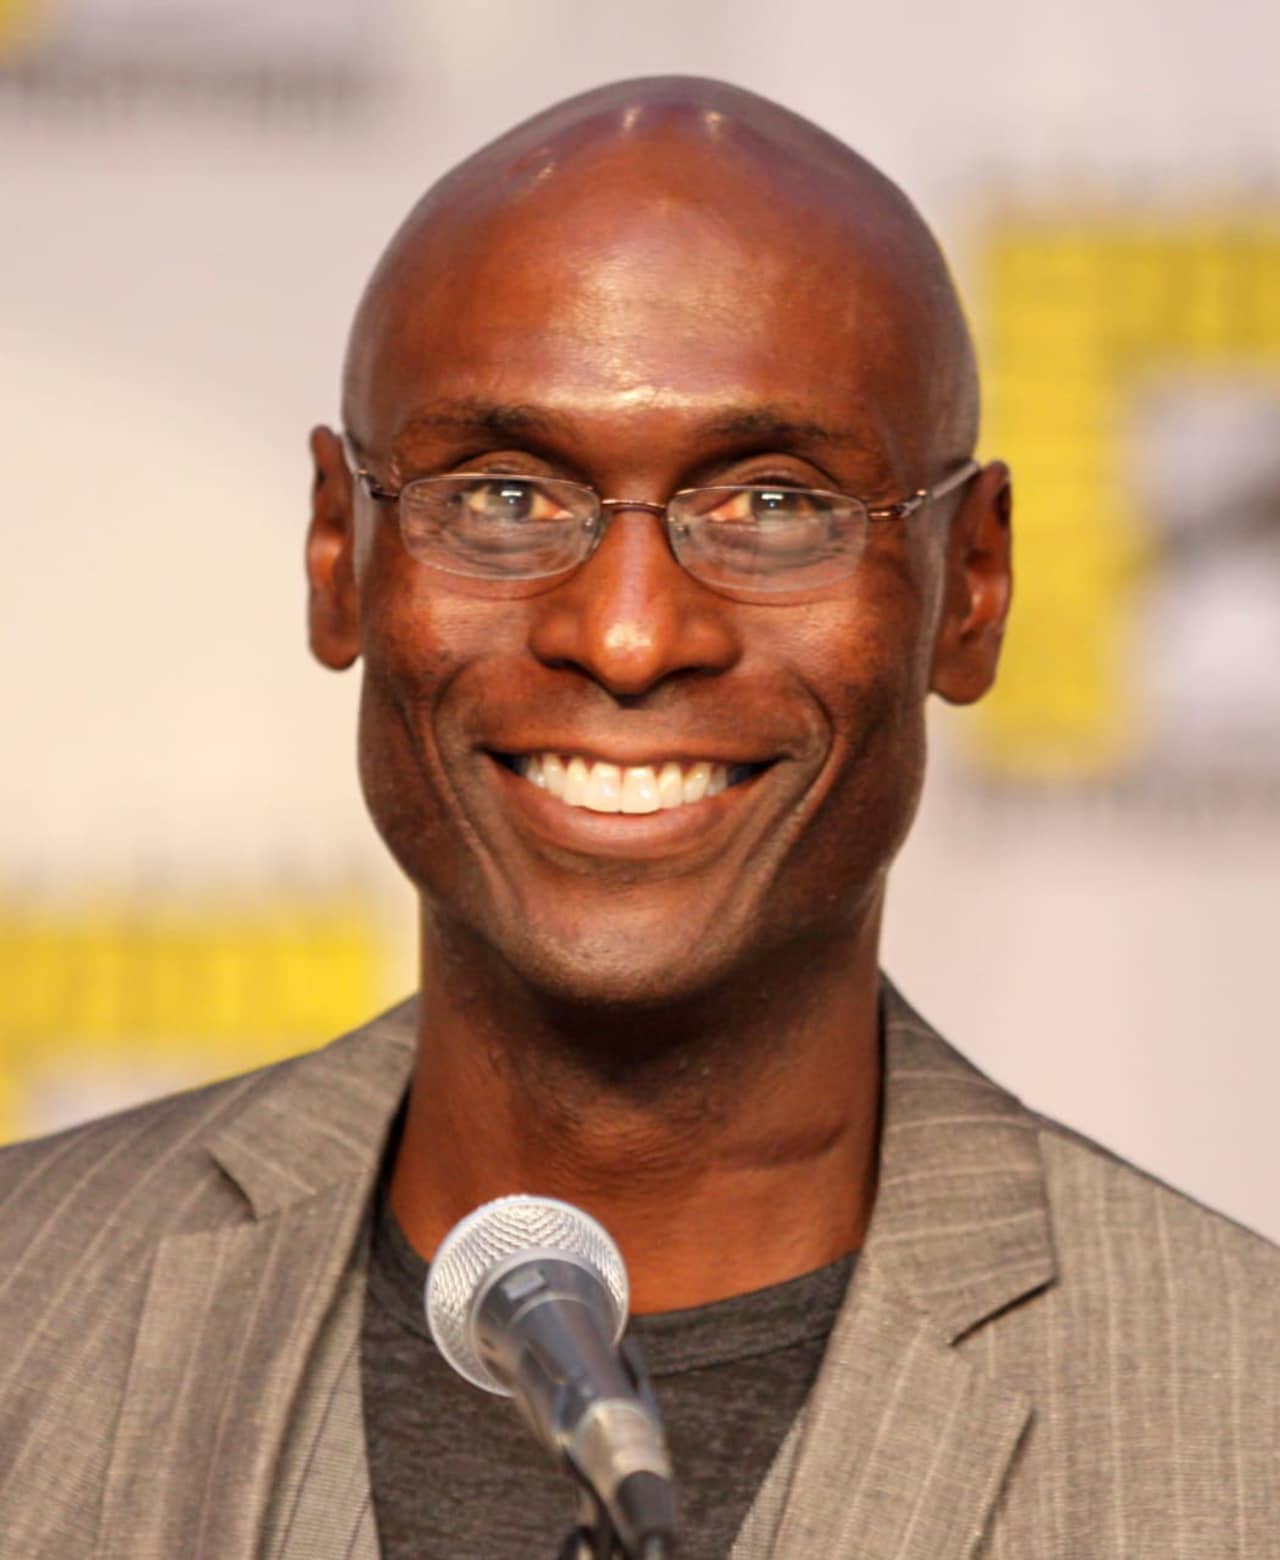 YALE GRADUATE LANCE REDDICK, STAR OF “THE WIRE,” AS ‘JOHN WICK’ DIES AT 60. Daniel Whyte III, President of Gospel Light Society International, says all that matters now is whether or not Lance Riddick met and trusted the Lord Jesus Christ as his Savior at some point in his life. If he did, he is in Heaven with the Lord Jesus Christ, and all is well; if he didn’t, he is in hell, and all is not well. The main reason we are running this story now is because of you. This impressive Yale graduate with a commanding presence in all his acting roles is gone, but you are still here. His death reminds us all that we can die at any moment. The question for you is, where will you go when you die — Heaven or hell? Listen to the most loving words, the most magnificent words, and the most important words ever said in the history of mankind by Jesus Christ: “For God so loved the world, that he gave his only begotten Son, that whosoever believeth in him should not perish, but have everlasting life.”